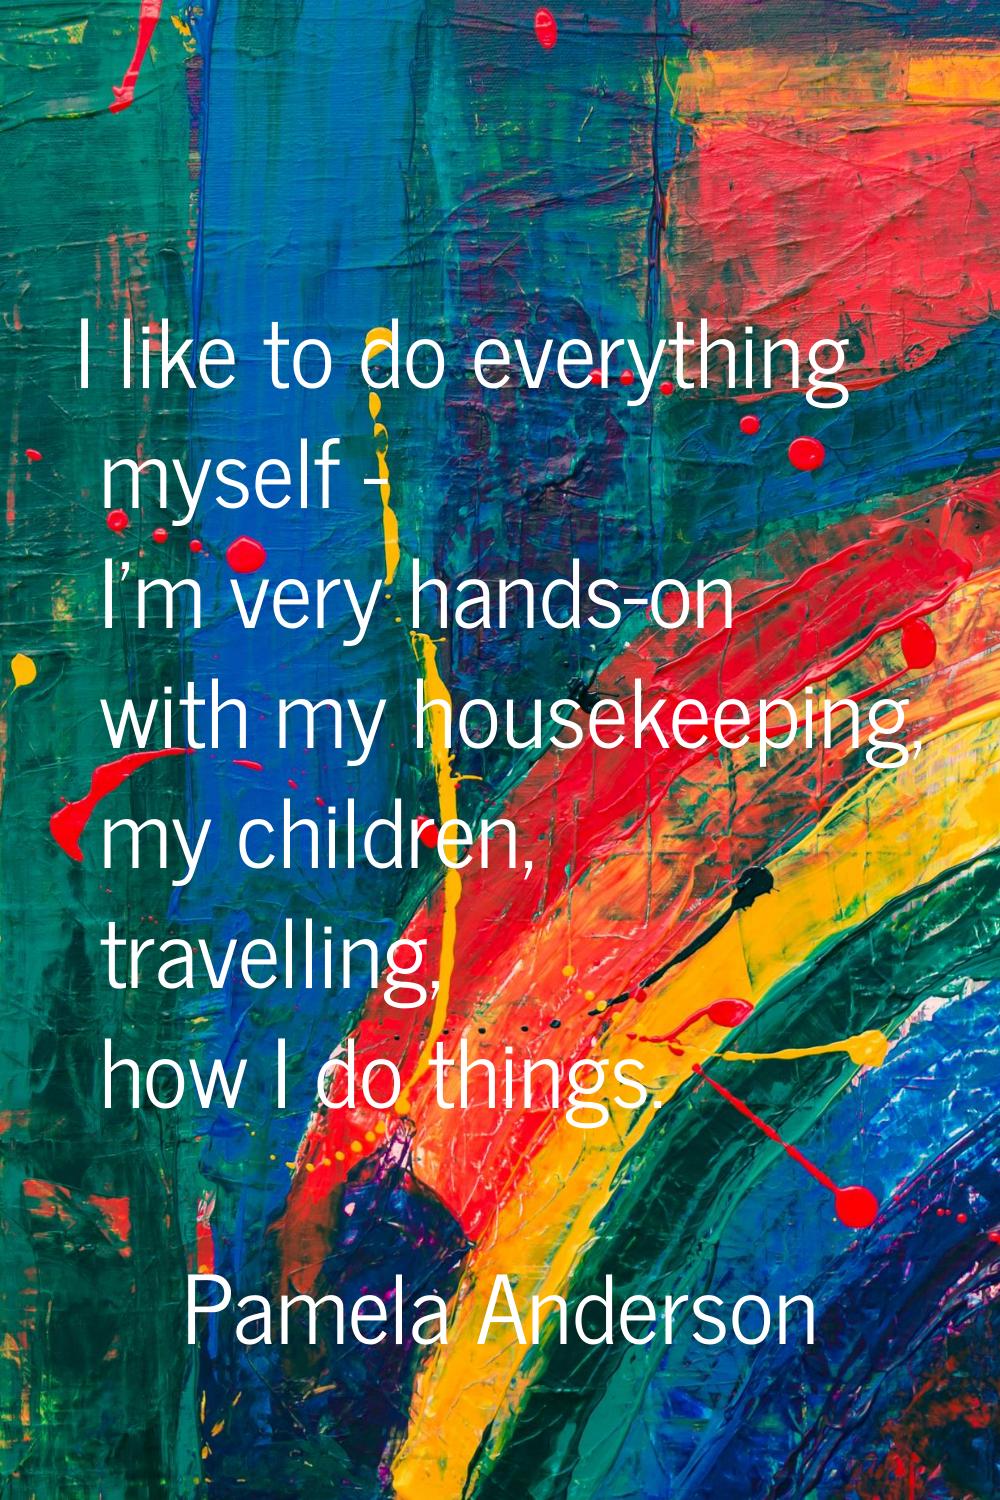 I like to do everything myself - I'm very hands-on with my housekeeping, my children, travelling, h